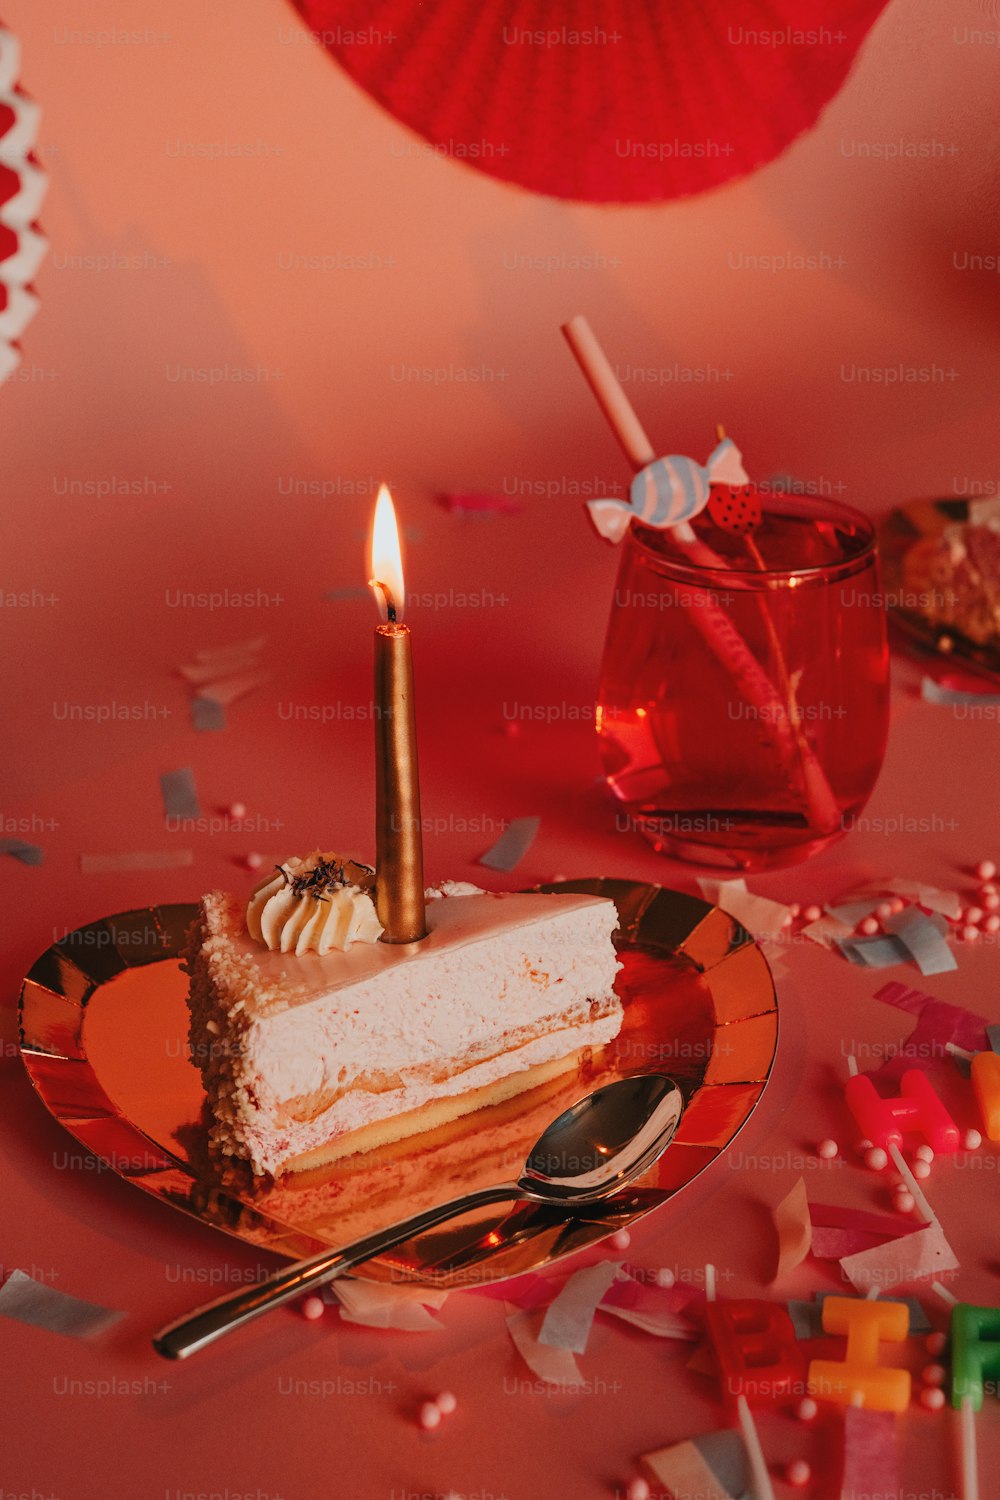 a piece of cake on a plate with a candle